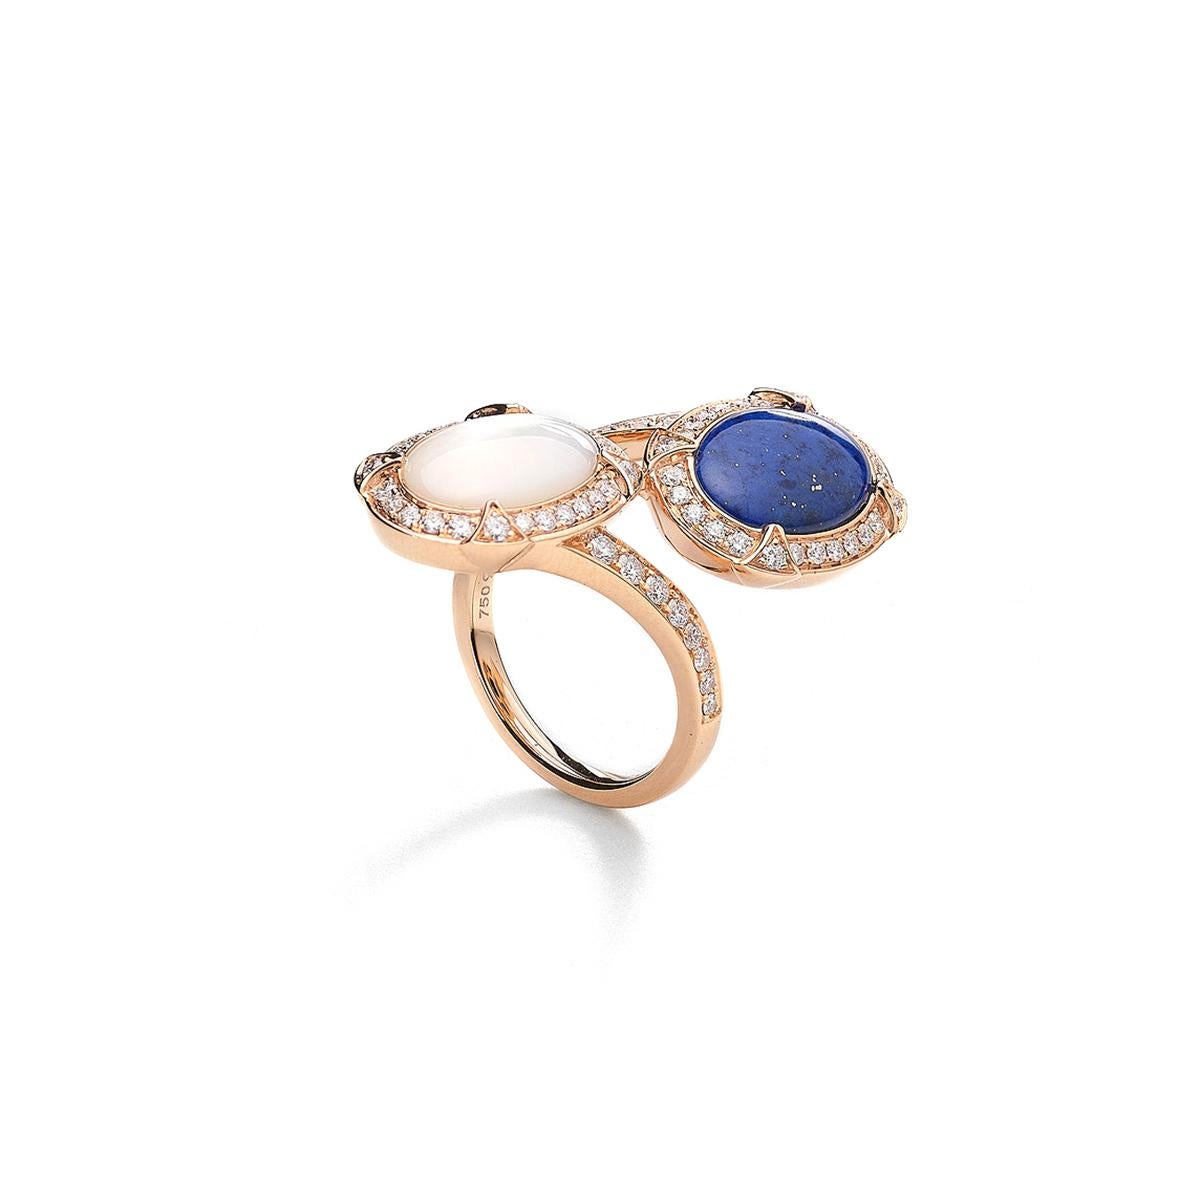 Ring in 18kt pink gold set with 68 diamonds 0.77 cts, one mother of pearl 1.80 cts and one lapis lazuli 1.92 cts Size 53